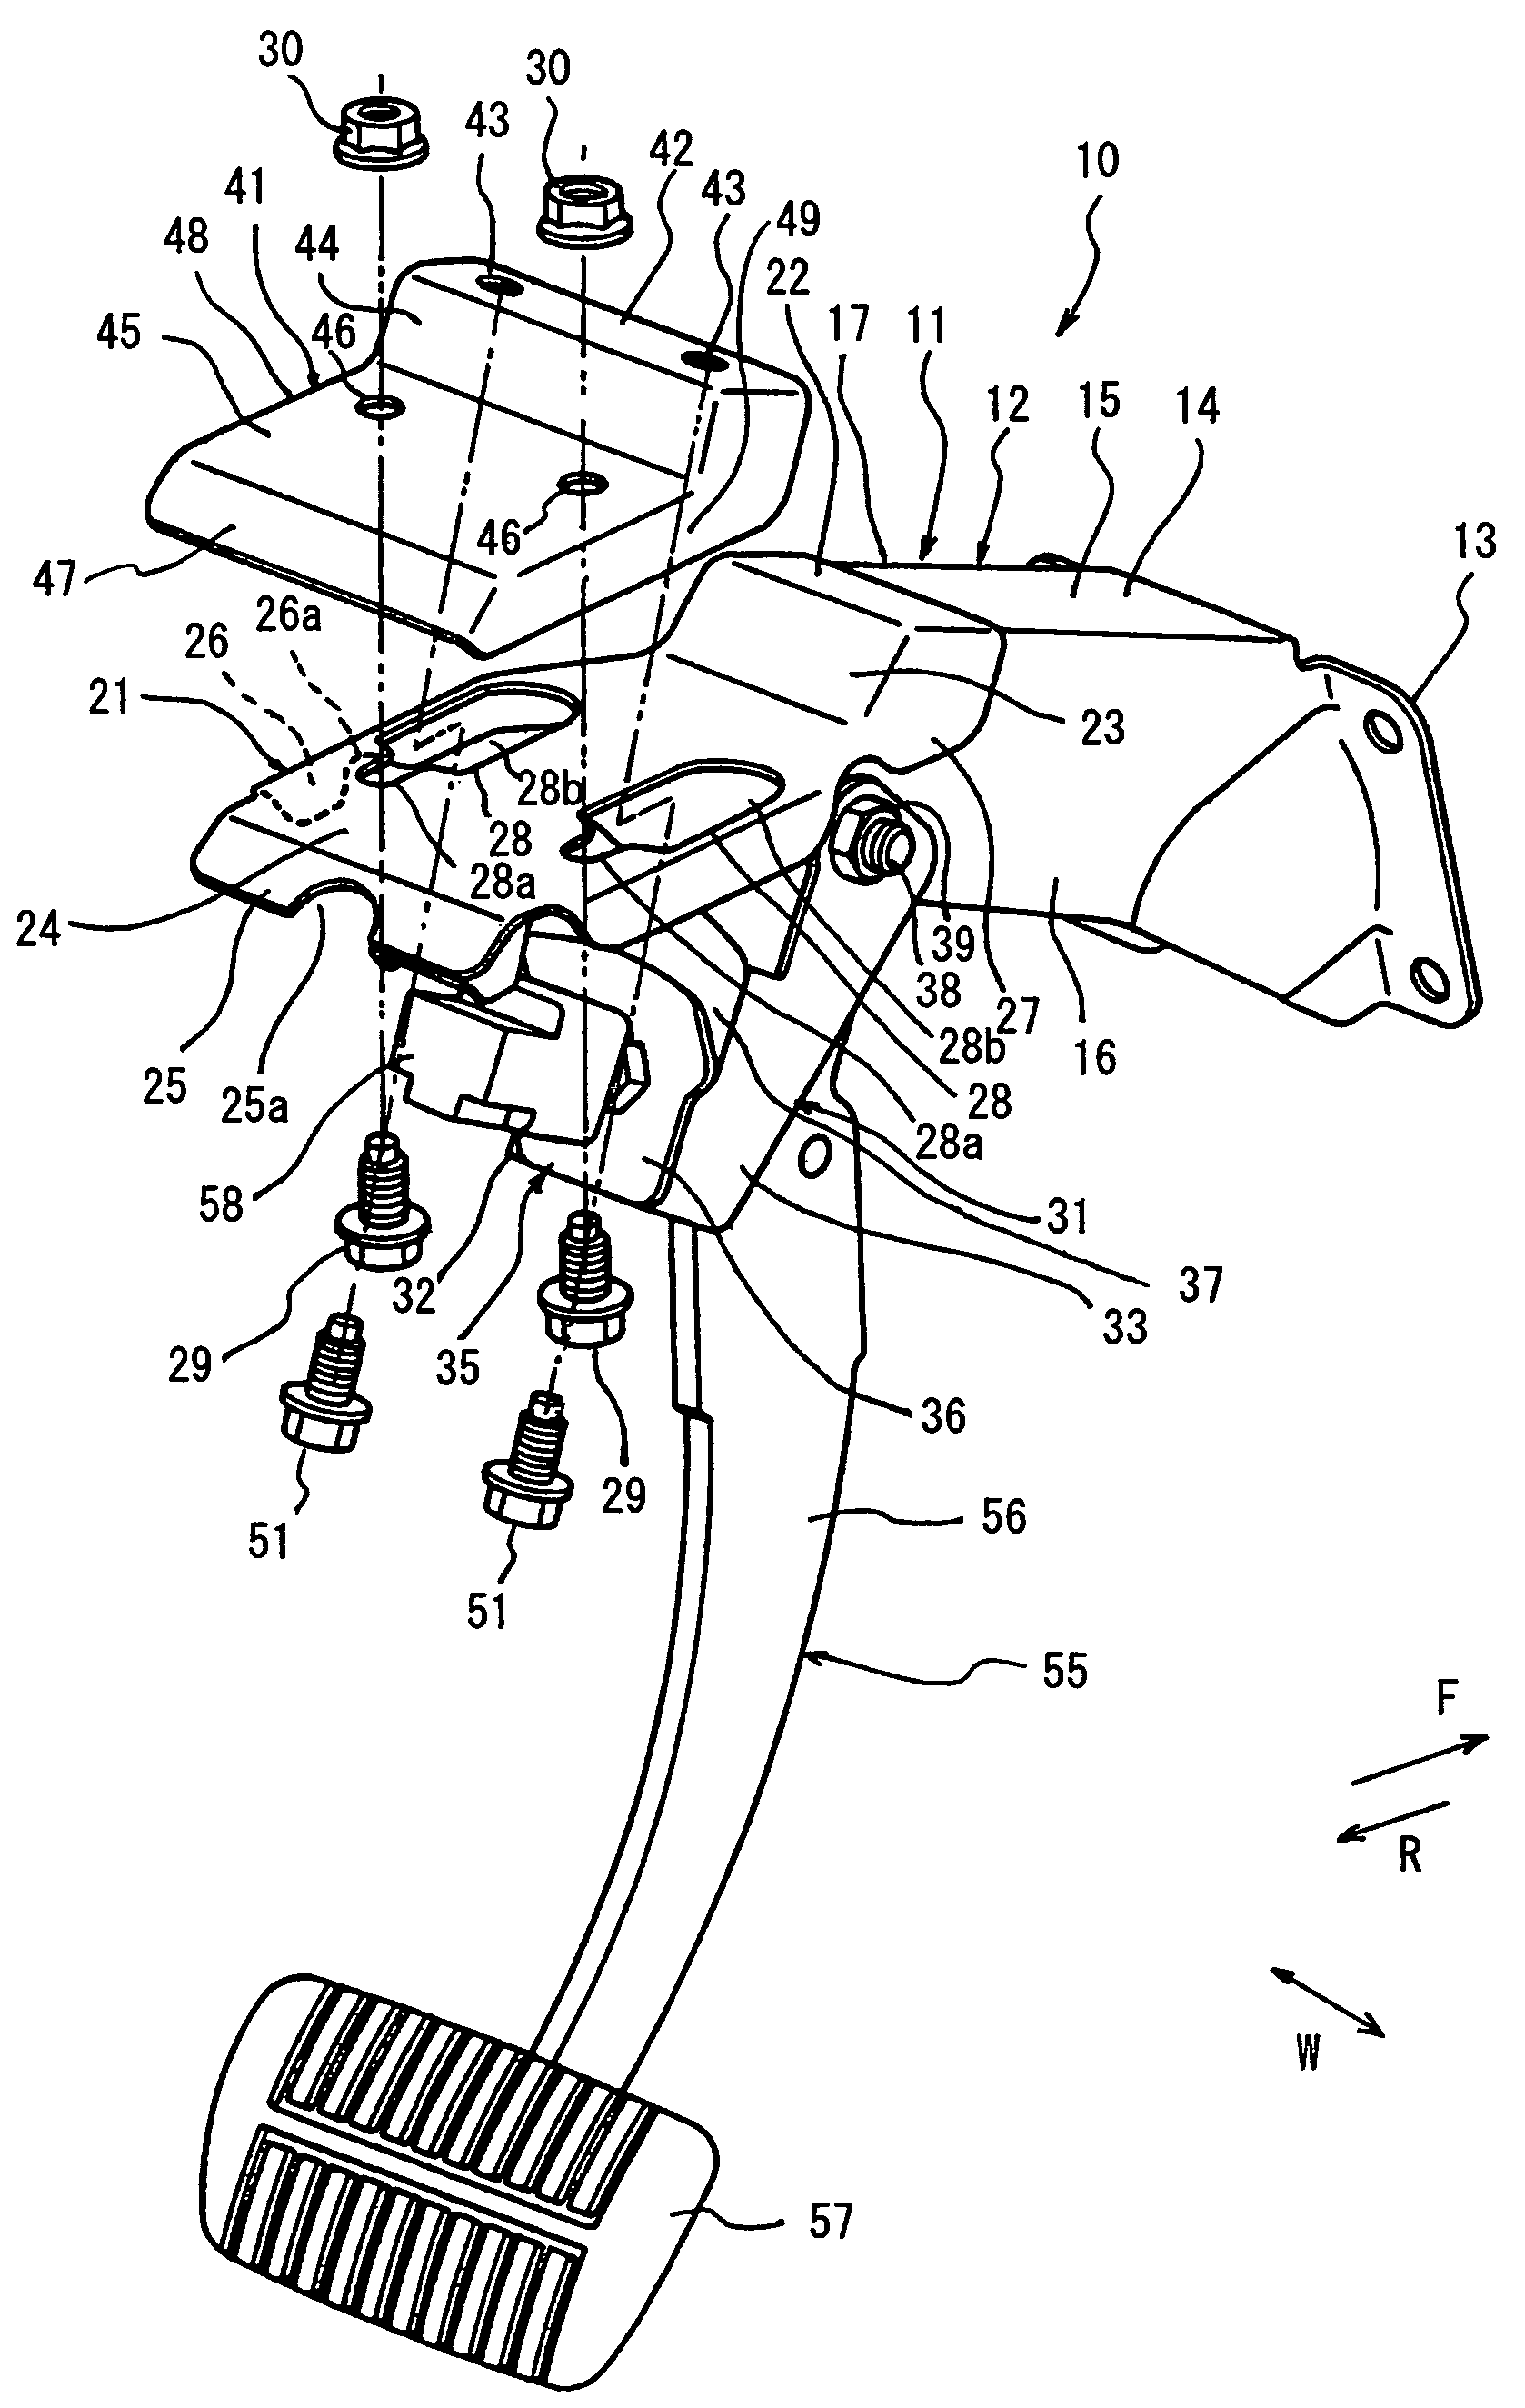 Pedal support structure for vehicle